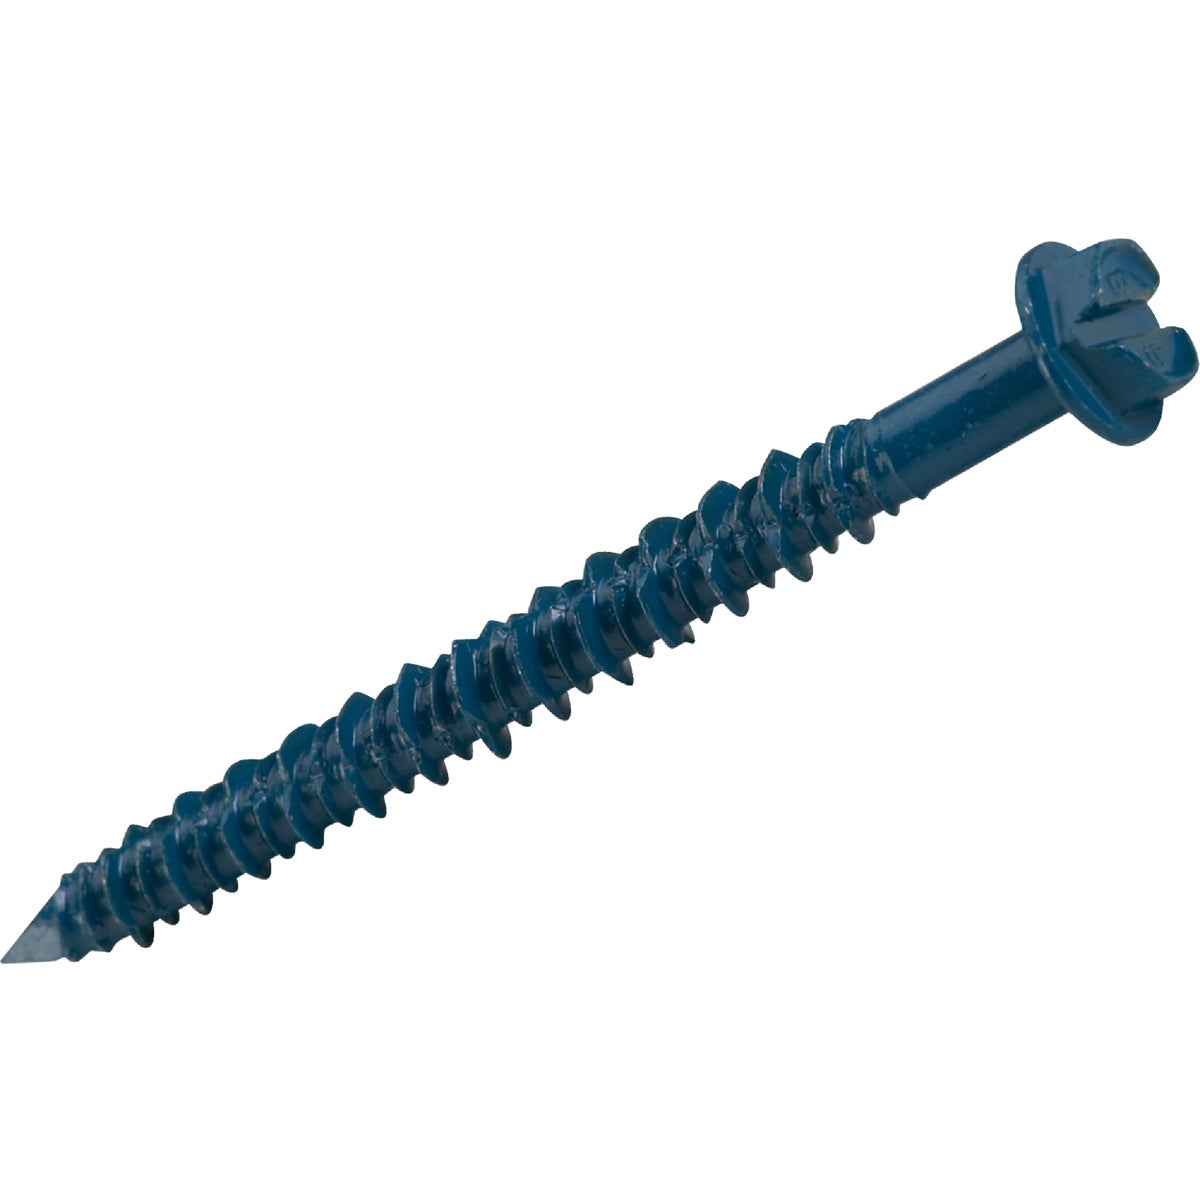 Item 718696, Manufactured for top performance in masonry-based applications, Tapper 